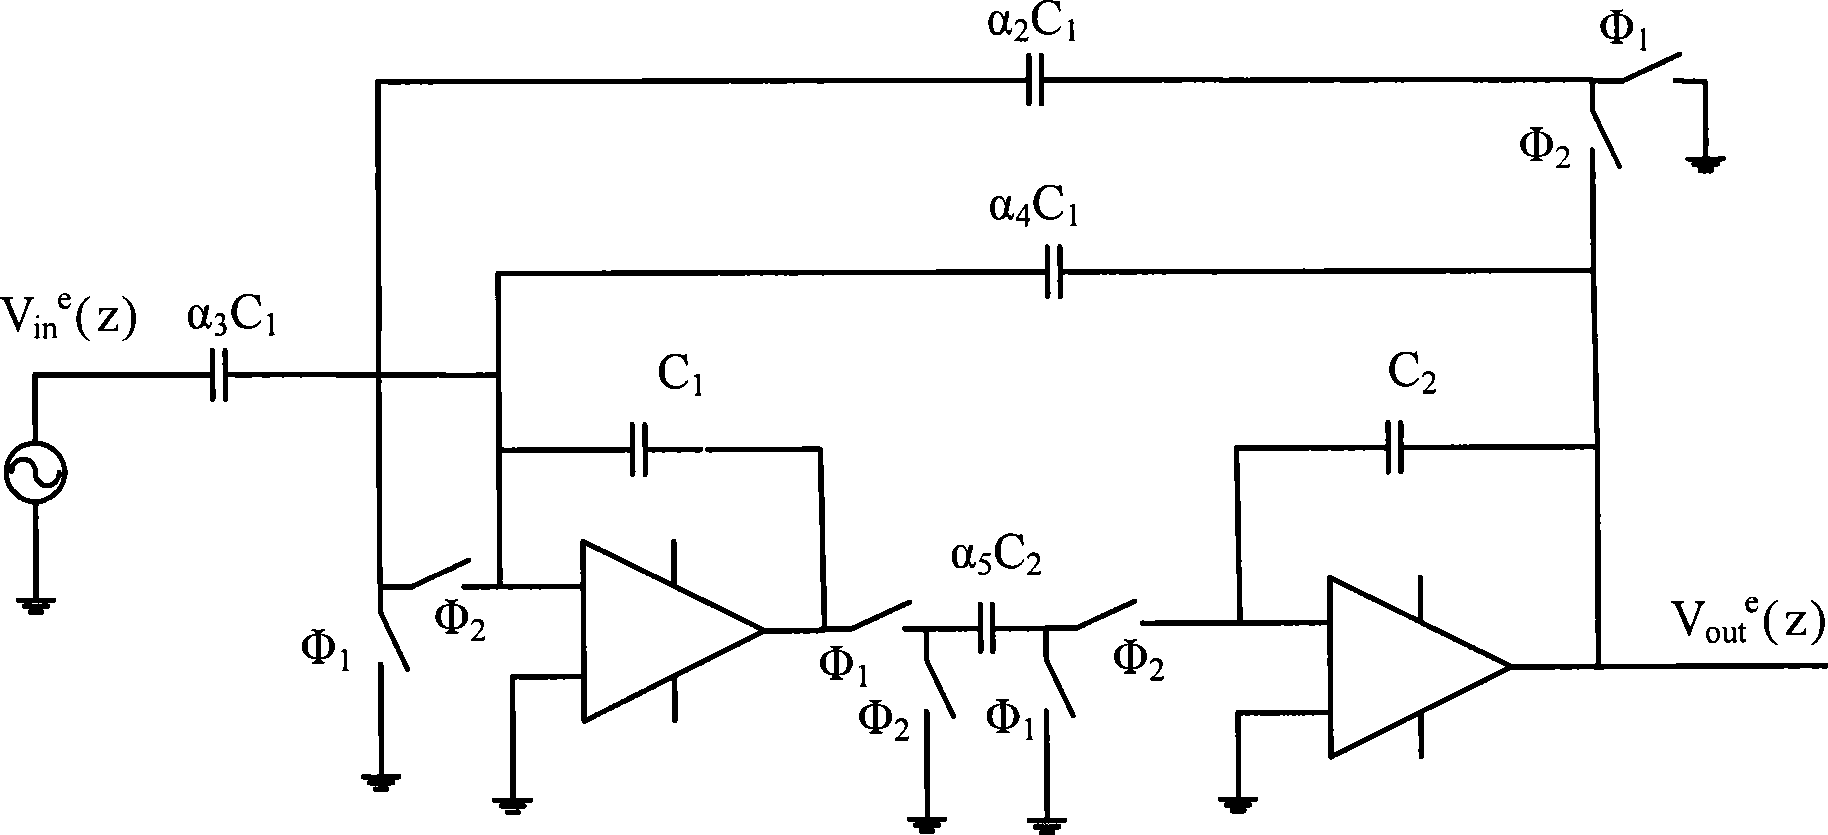 Switch capacitor band-pass filter and continuous time band-pass filter